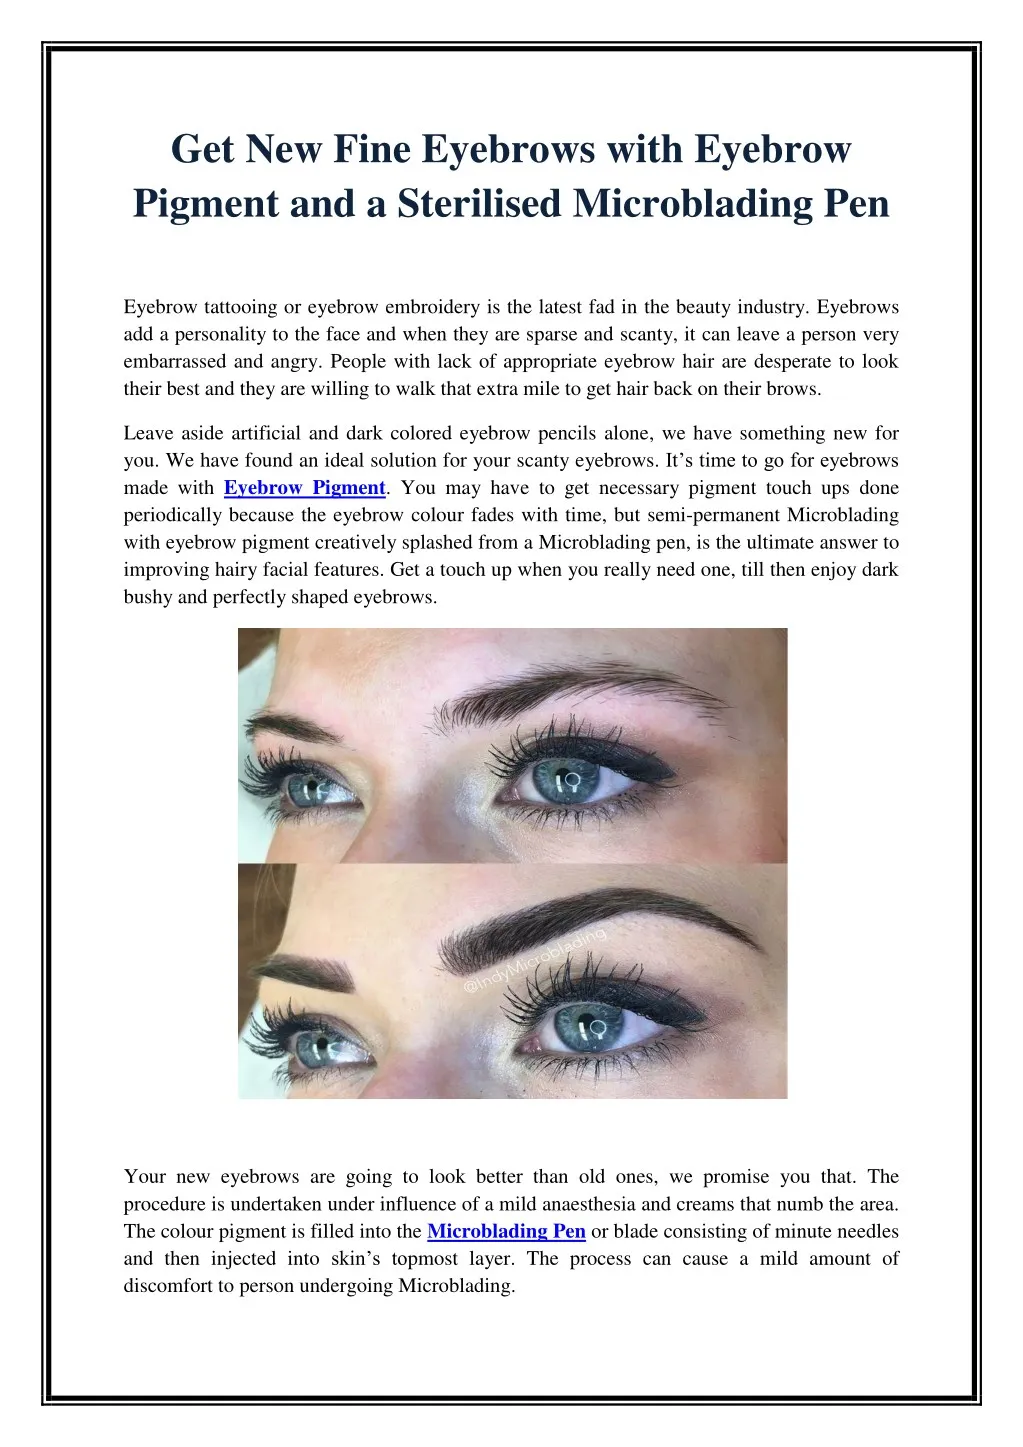 get new fine eyebrows with eyebrow pigment